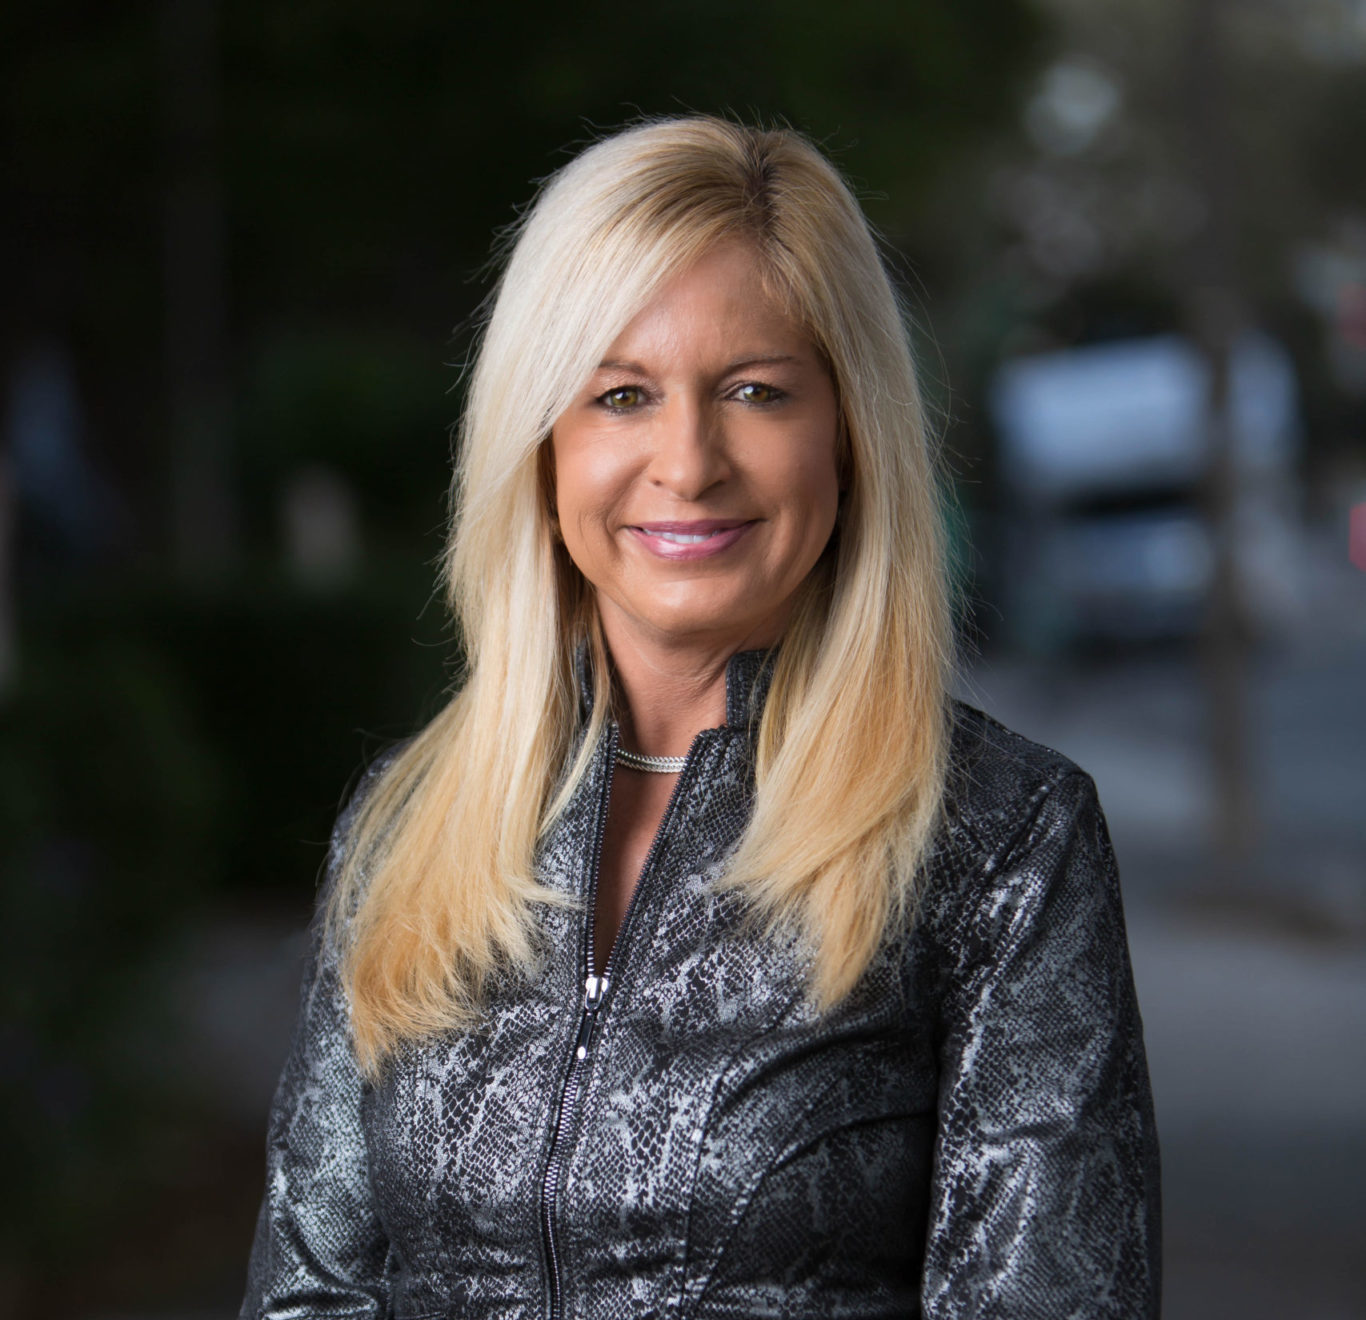 Kelly Smallridge, president and CEO of the Business Development Board of Palm Beach County